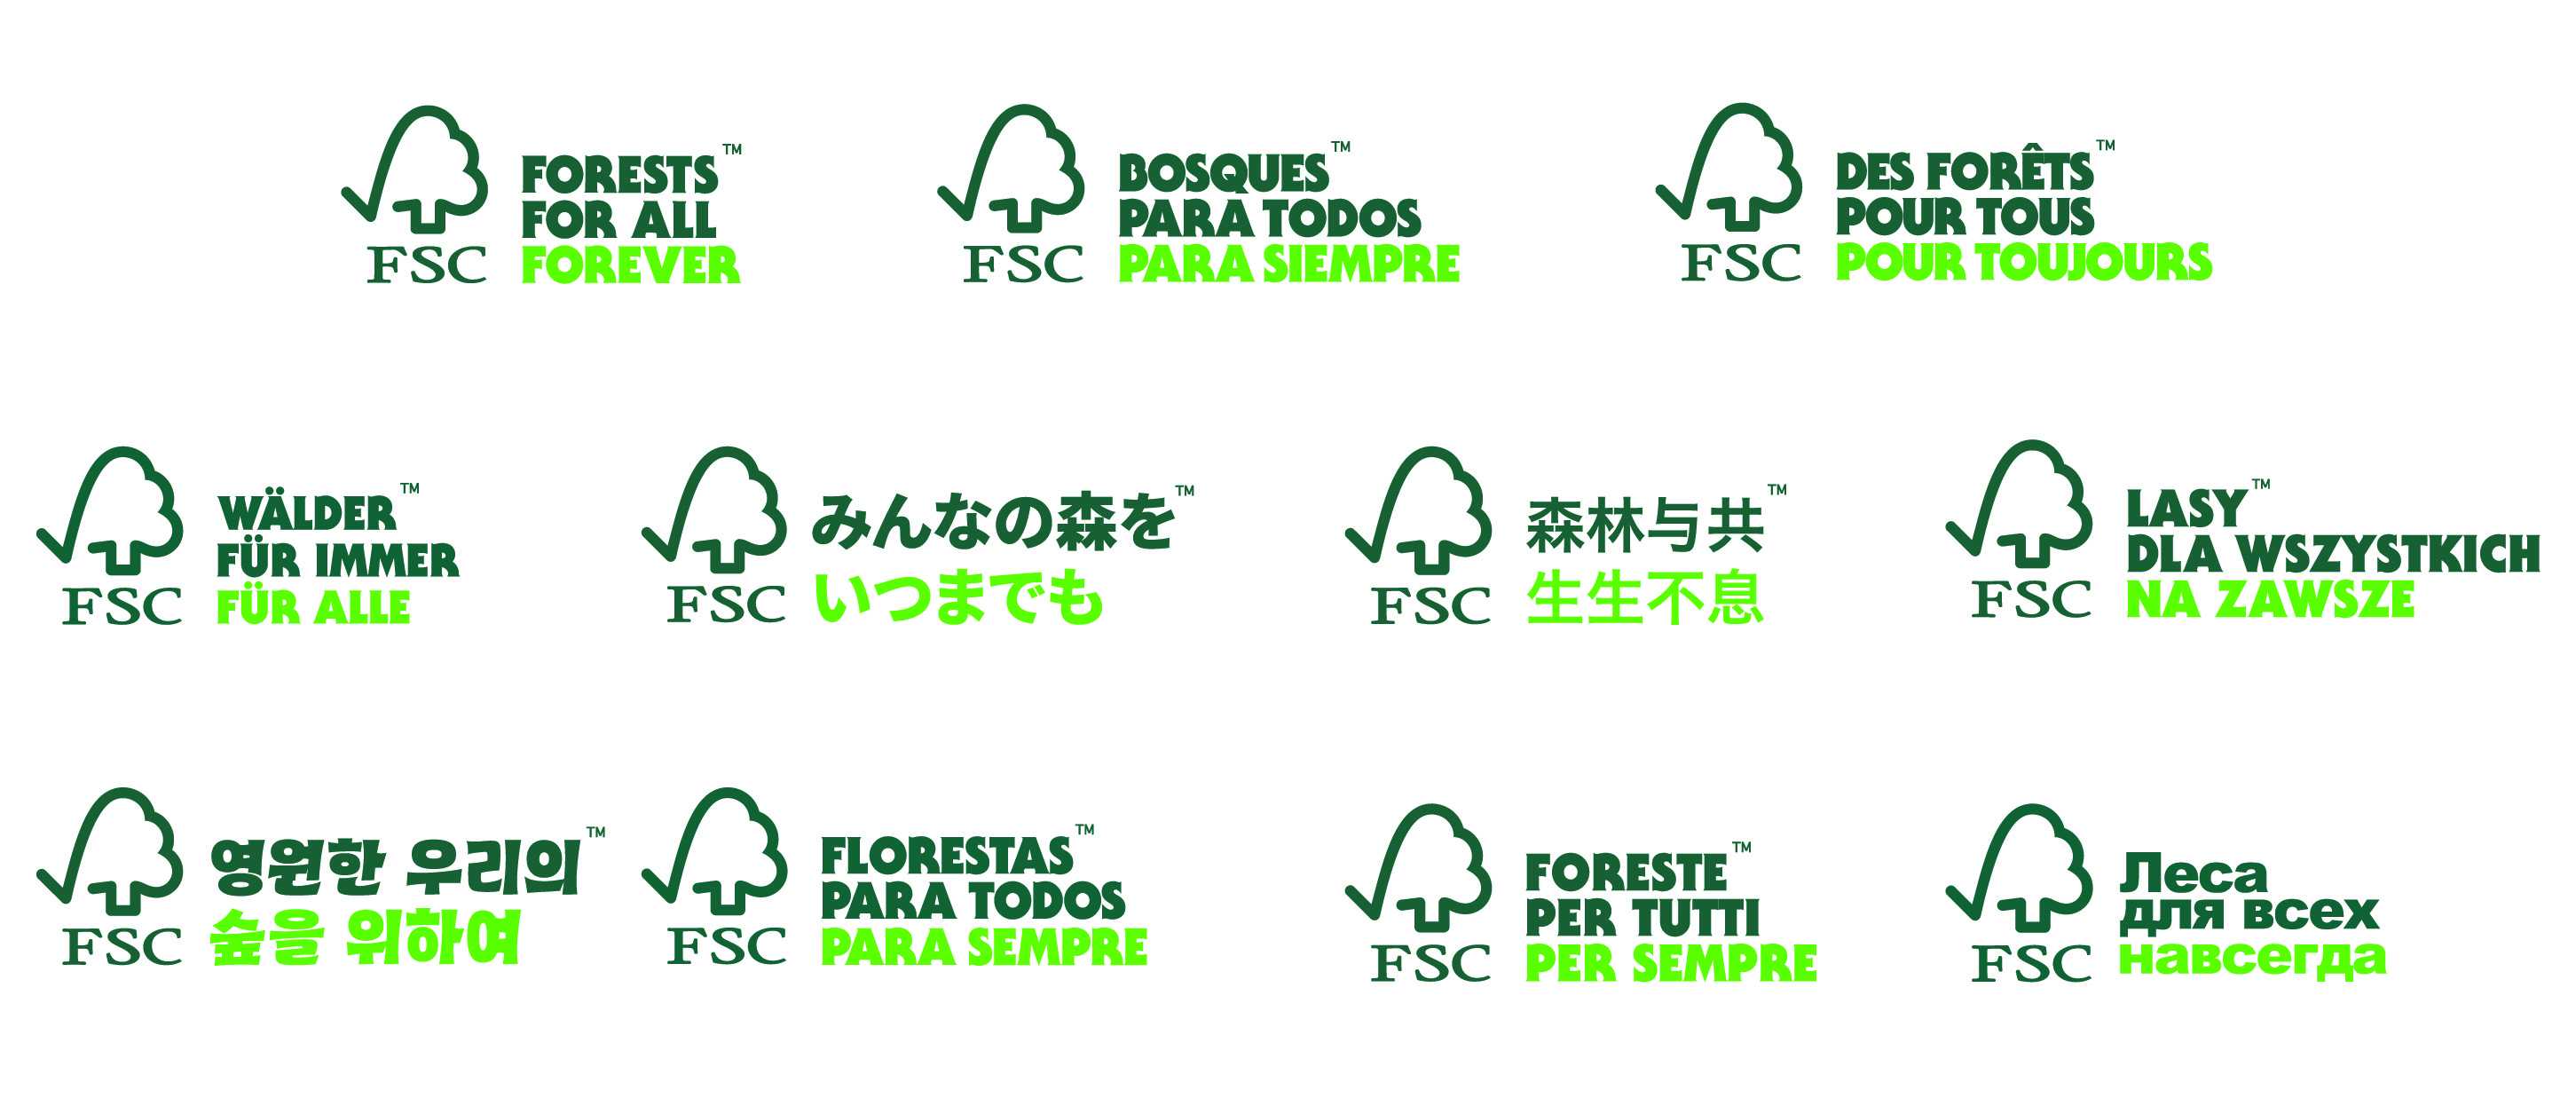 fsc logos in different languages